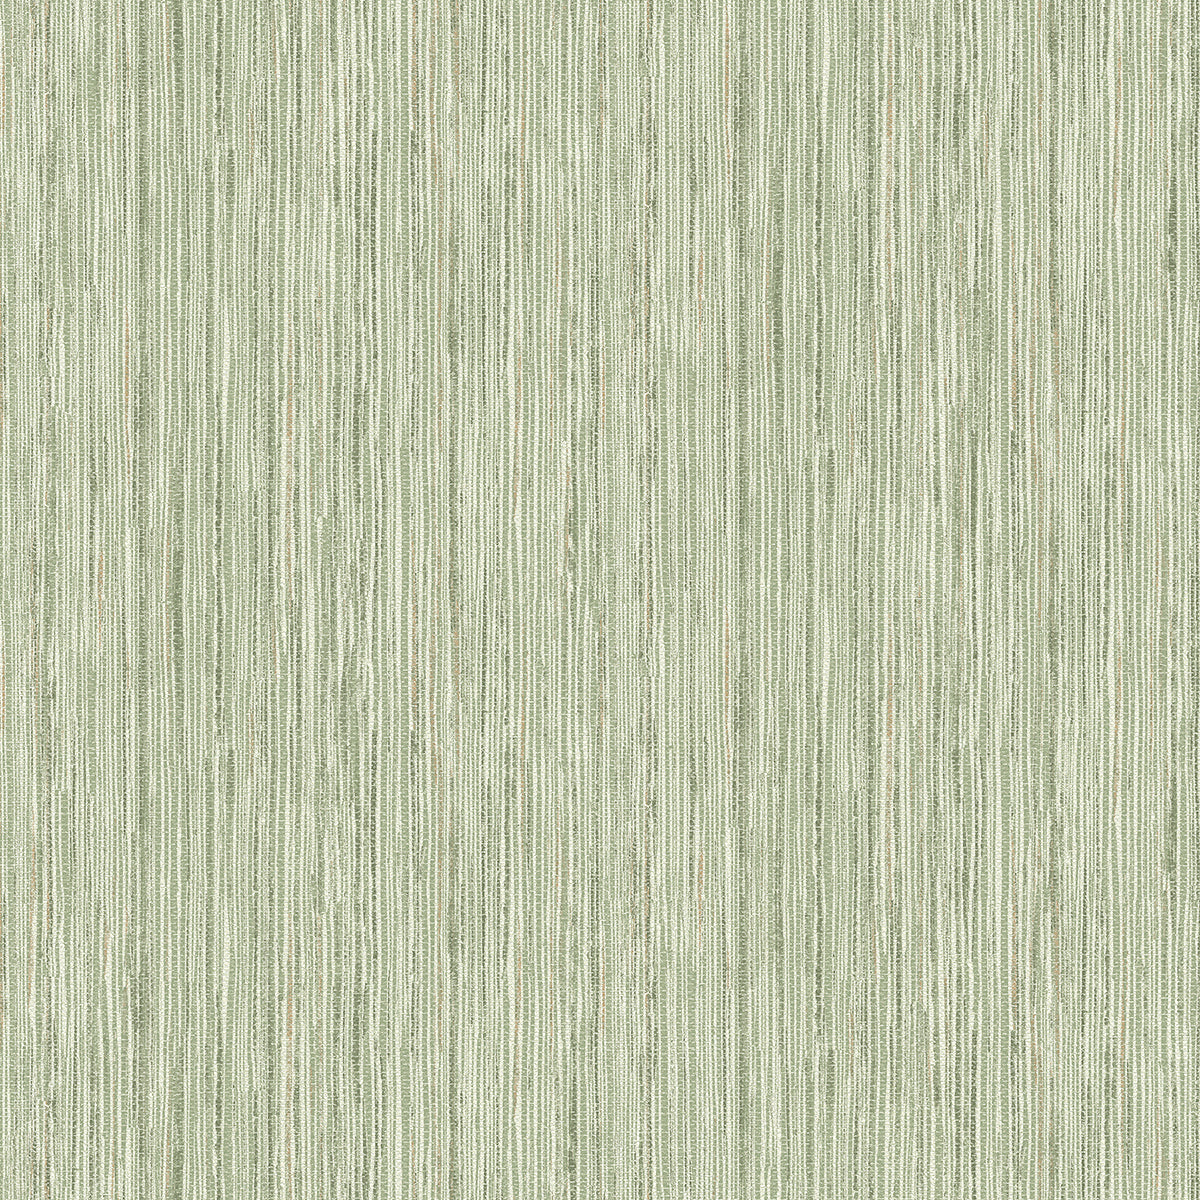 Picture of Justina Green Faux Grasscloth Wallpaper